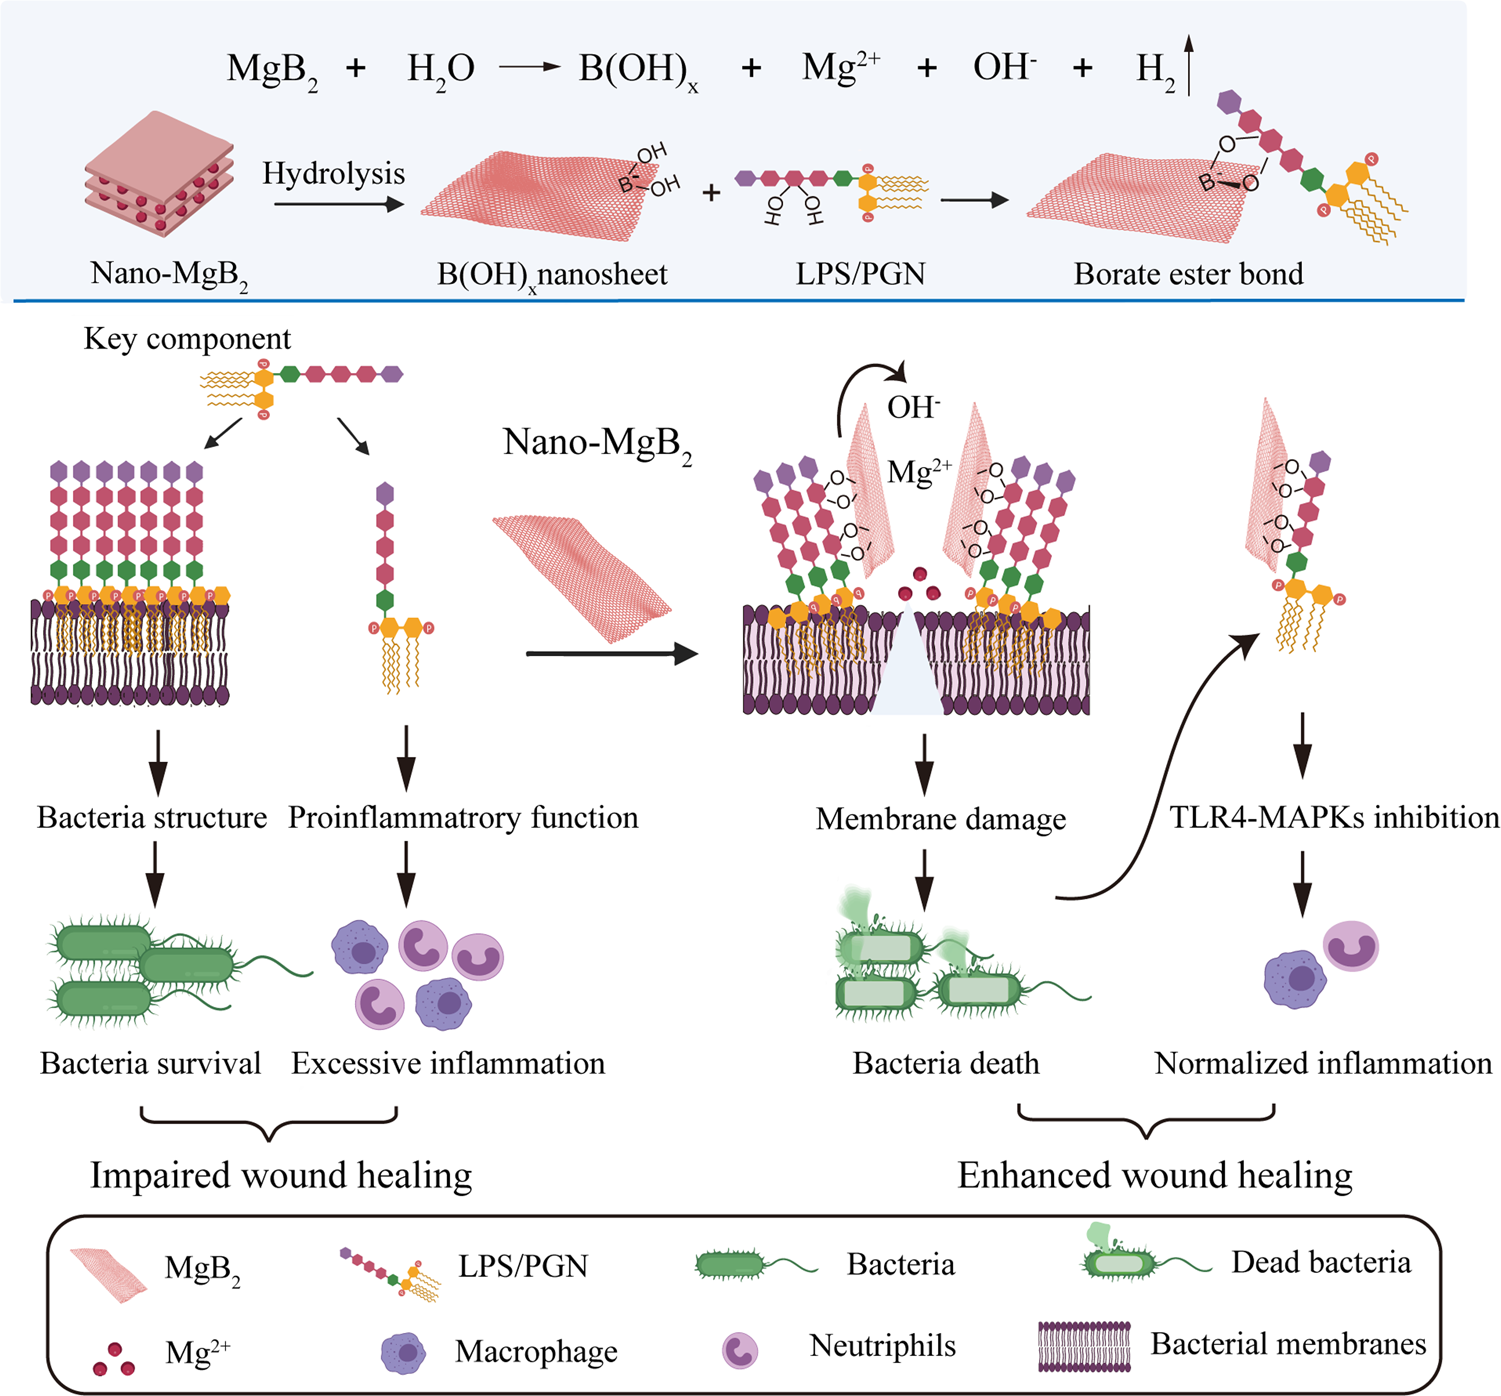 Spatiotemporal mapping of bacterial membrane potential responses